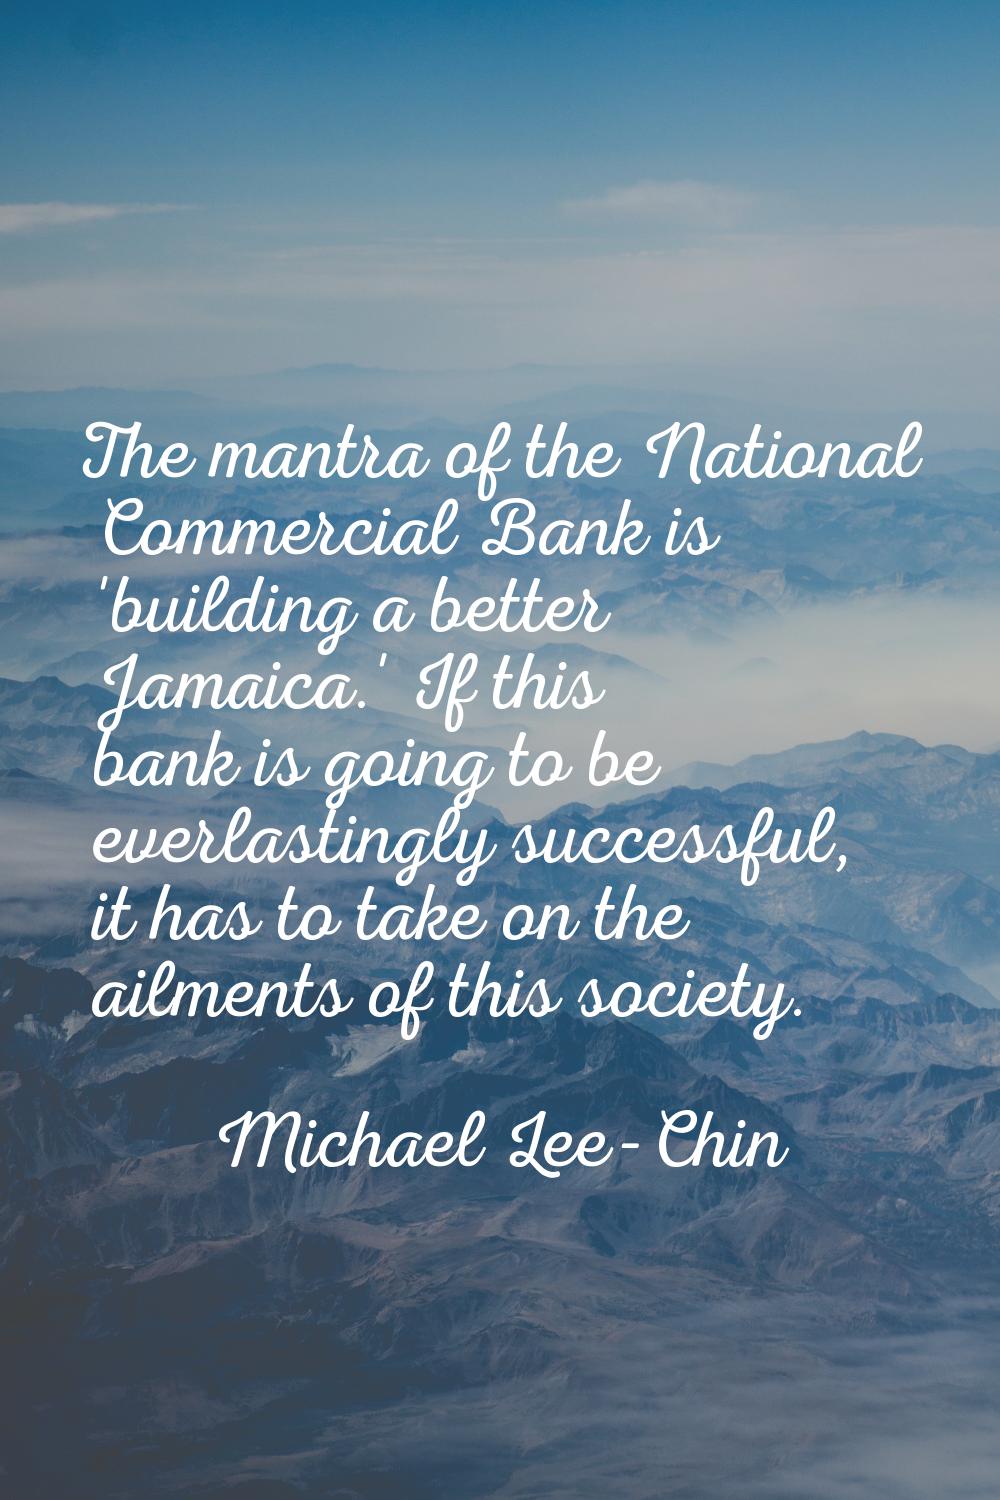 The mantra of the National Commercial Bank is 'building a better Jamaica.' If this bank is going to